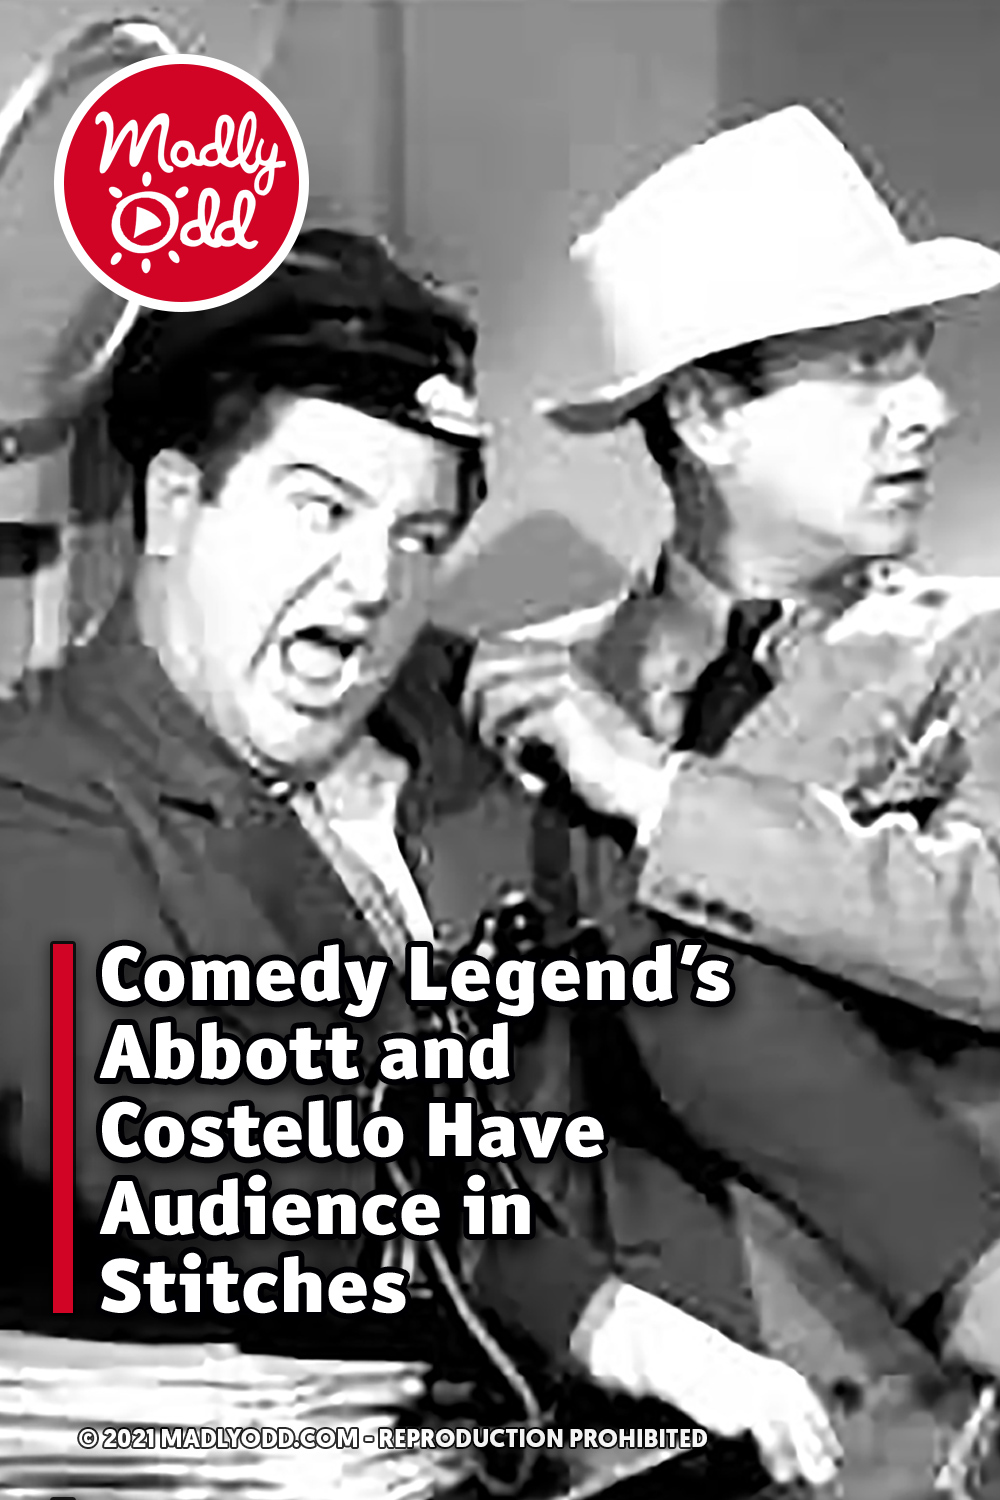 Comedy Legend’s Abbott and Costello Have Audience in Stitches